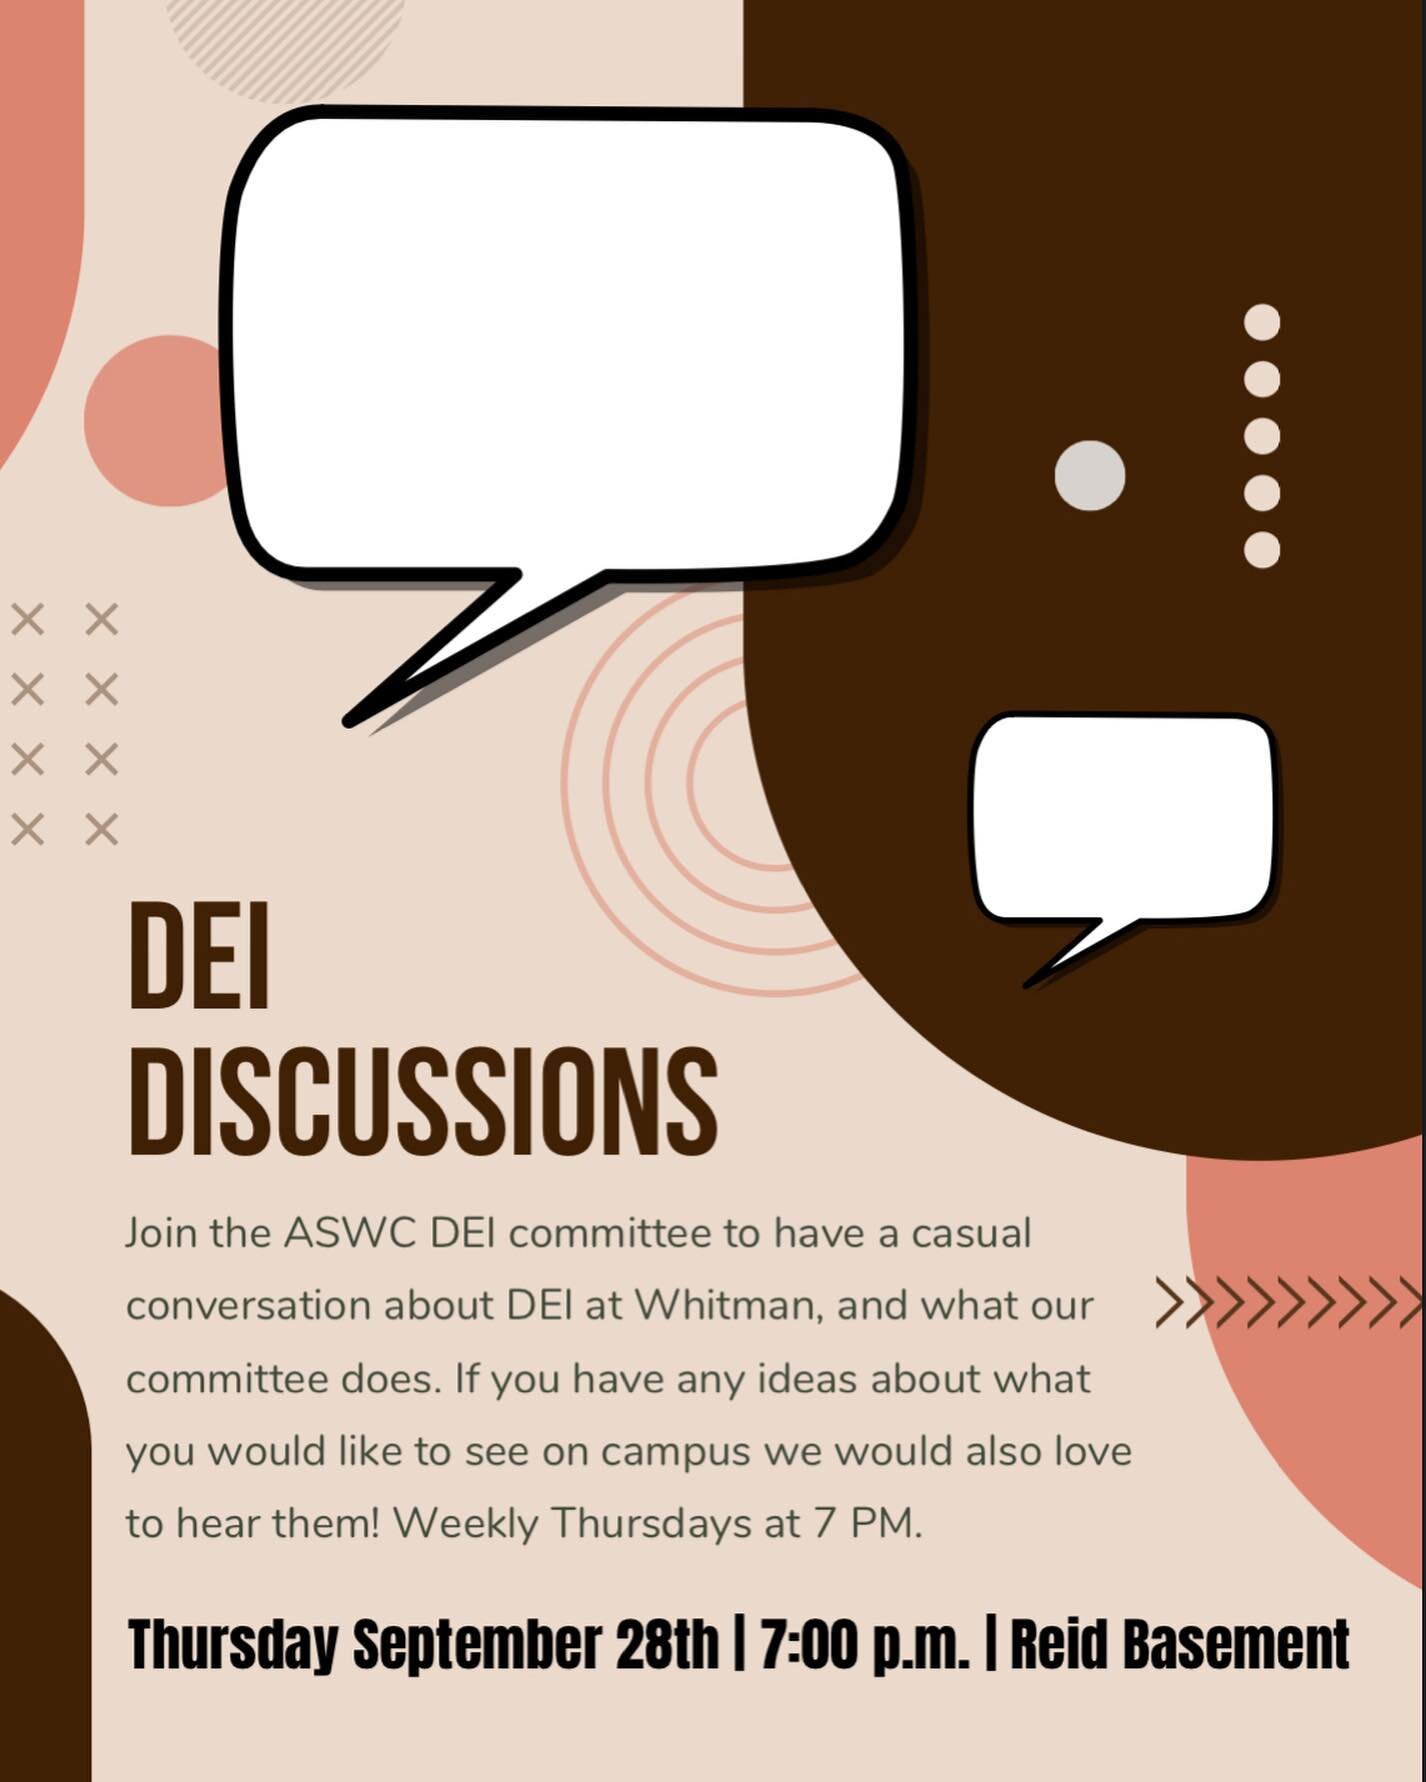 The DEI committee will be holding weekly discussions starting this Thursday. Make sure to stop by!